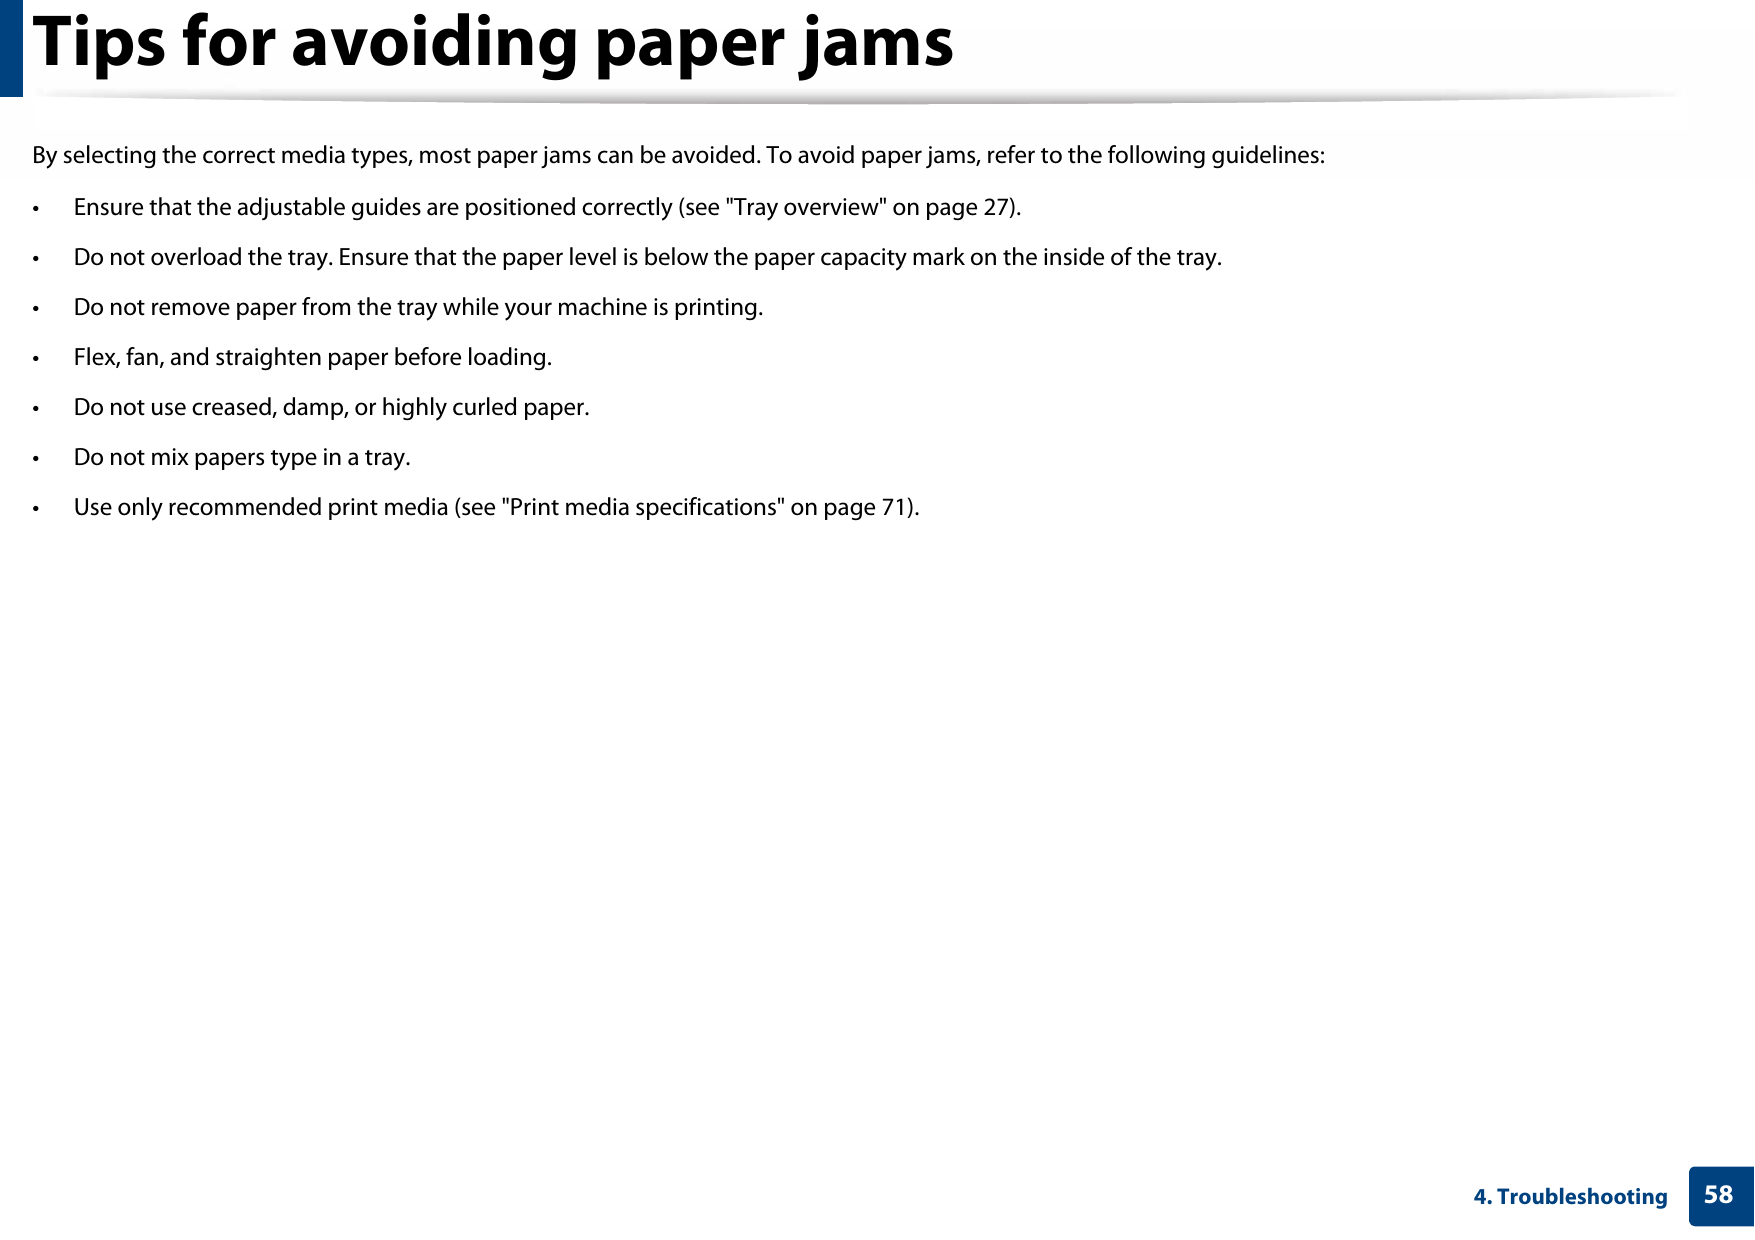 584. TroubleshootingTips for avoiding paper jamsBy selecting the correct media types, most paper jams can be avoided. To avoid paper jams, refer to the following guidelines:• Ensure that the adjustable guides are positioned correctly (see &quot;Tray overview&quot; on page 27).• Do not overload the tray. Ensure that the paper level is below the paper capacity mark on the inside of the tray.• Do not remove paper from the tray while your machine is printing.• Flex, fan, and straighten paper before loading. • Do not use creased, damp, or highly curled paper.• Do not mix papers type in a tray.• Use only recommended print media (see &quot;Print media specifications&quot; on page 71).